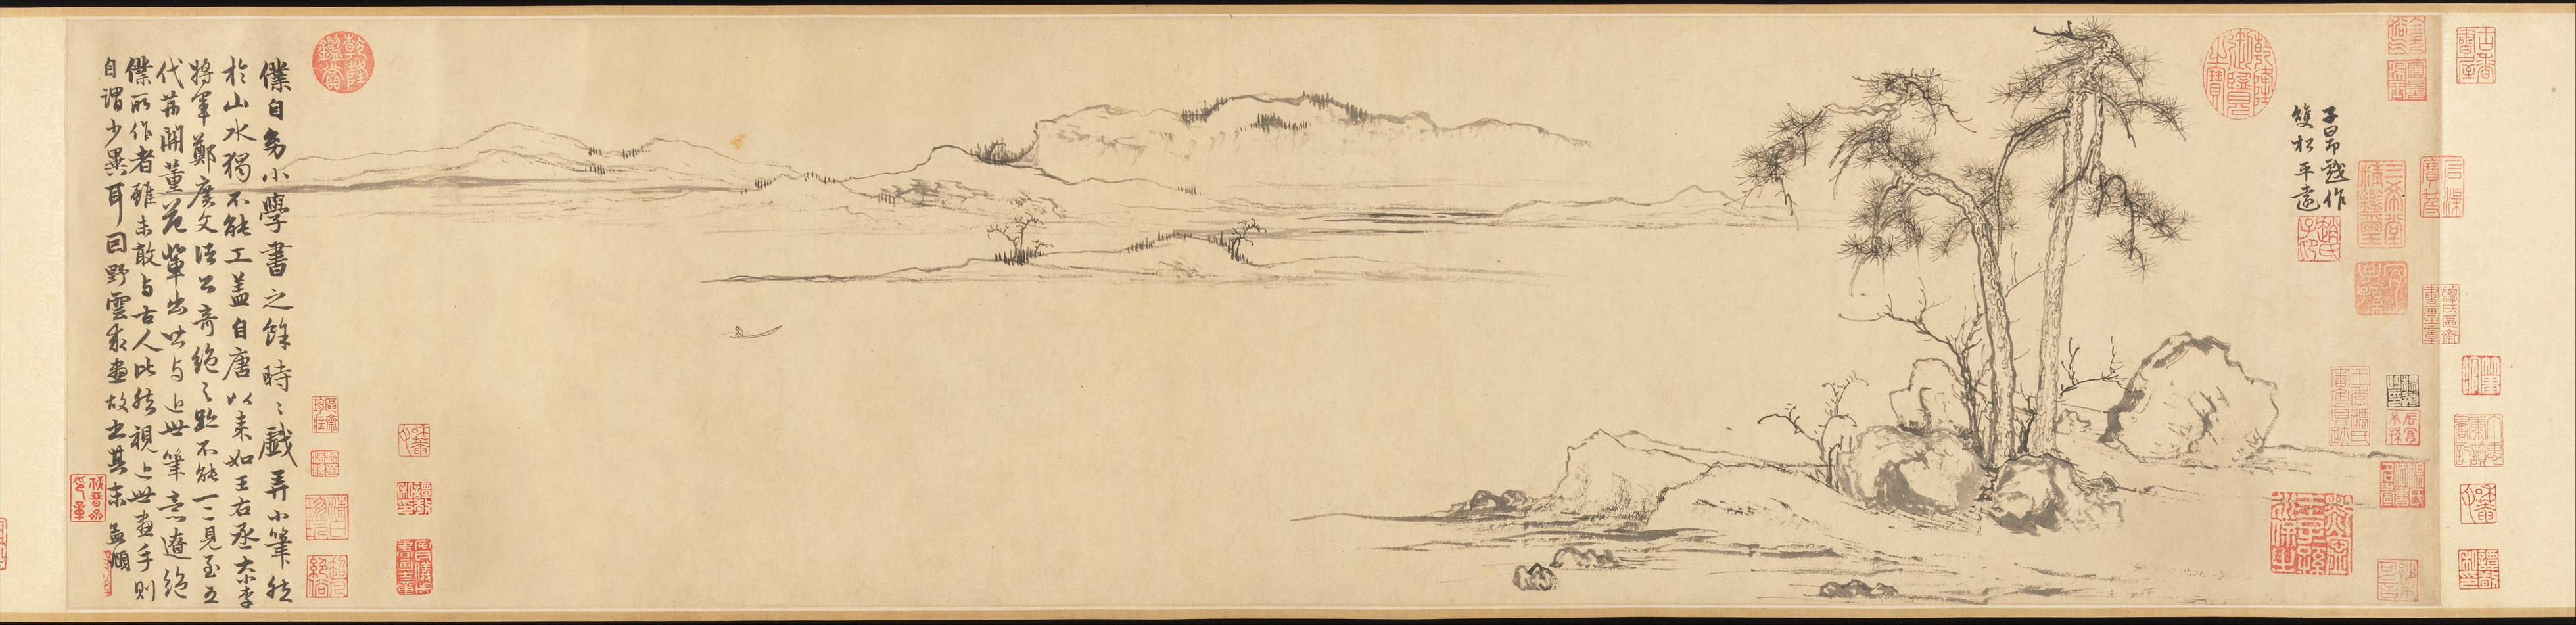 A minimalist calligraphic brush painting of a landscape in which mountains are in the background and pines are in the foreground. The painting is on a scroll meant to be viewed from right to left, and seals and text adorn each side.